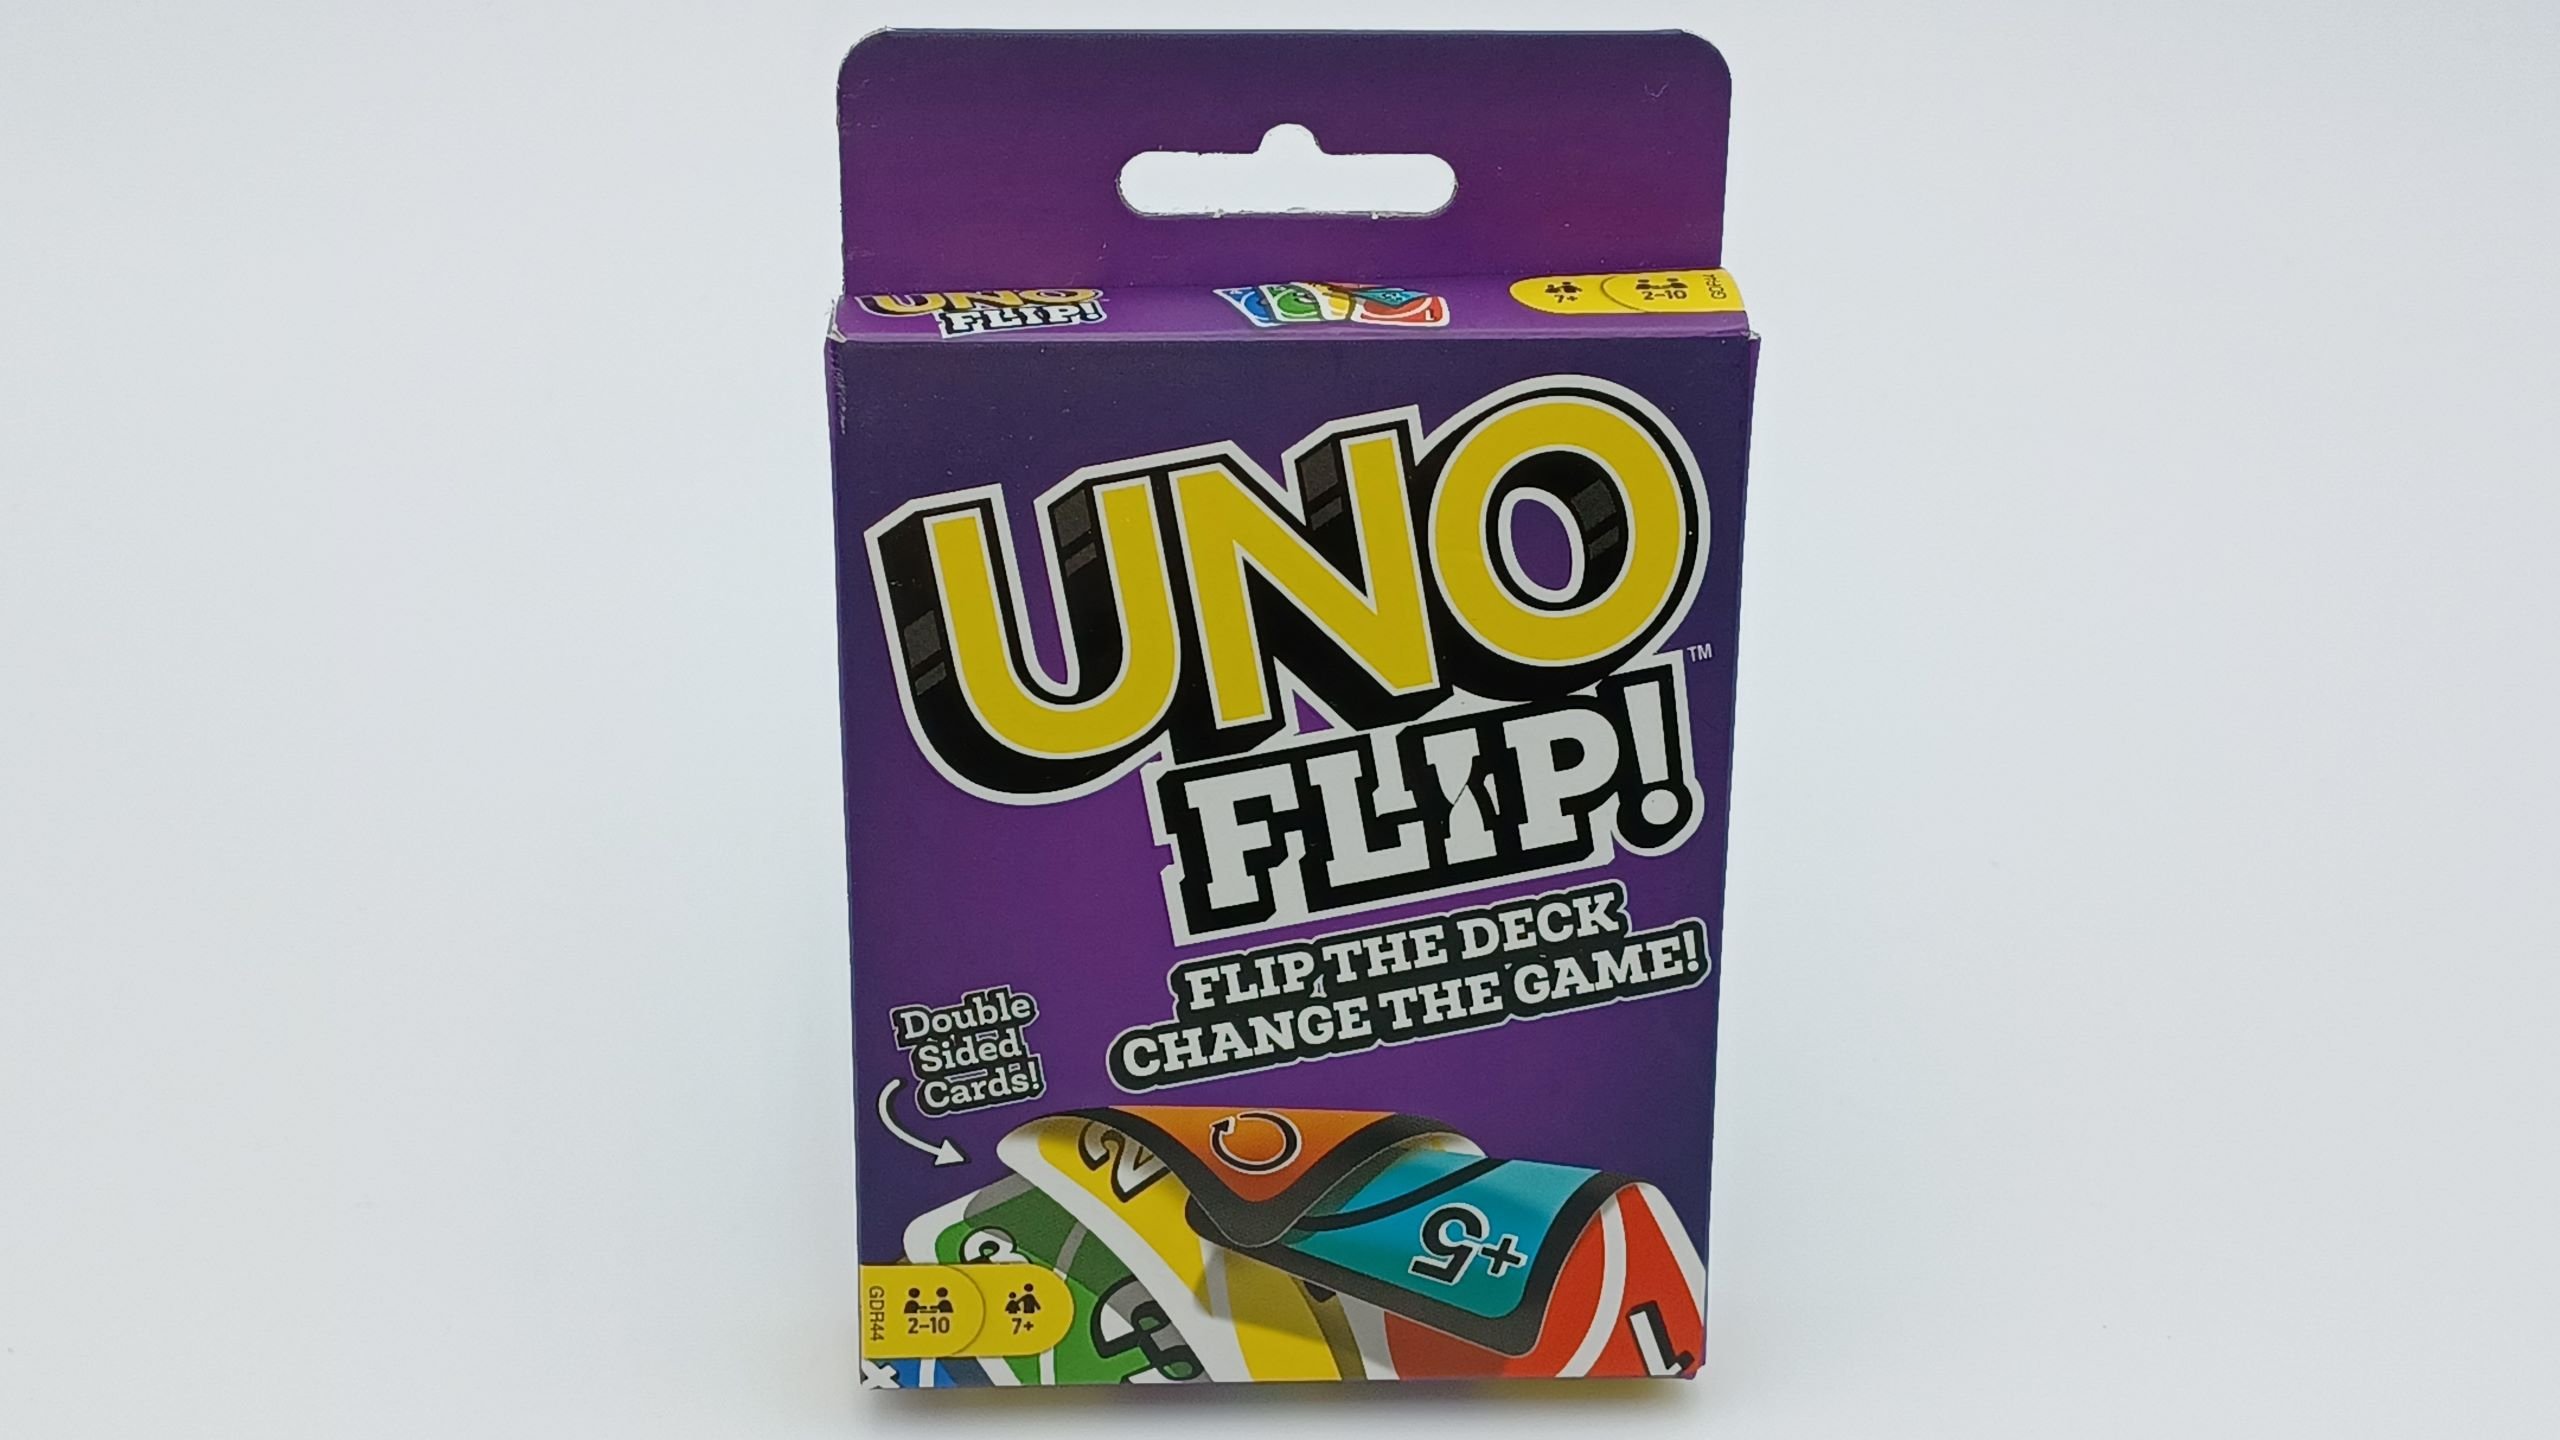 UNO FLIP! Double-Sided Cards UNO Flip! Flip the Deck, Change the Game!